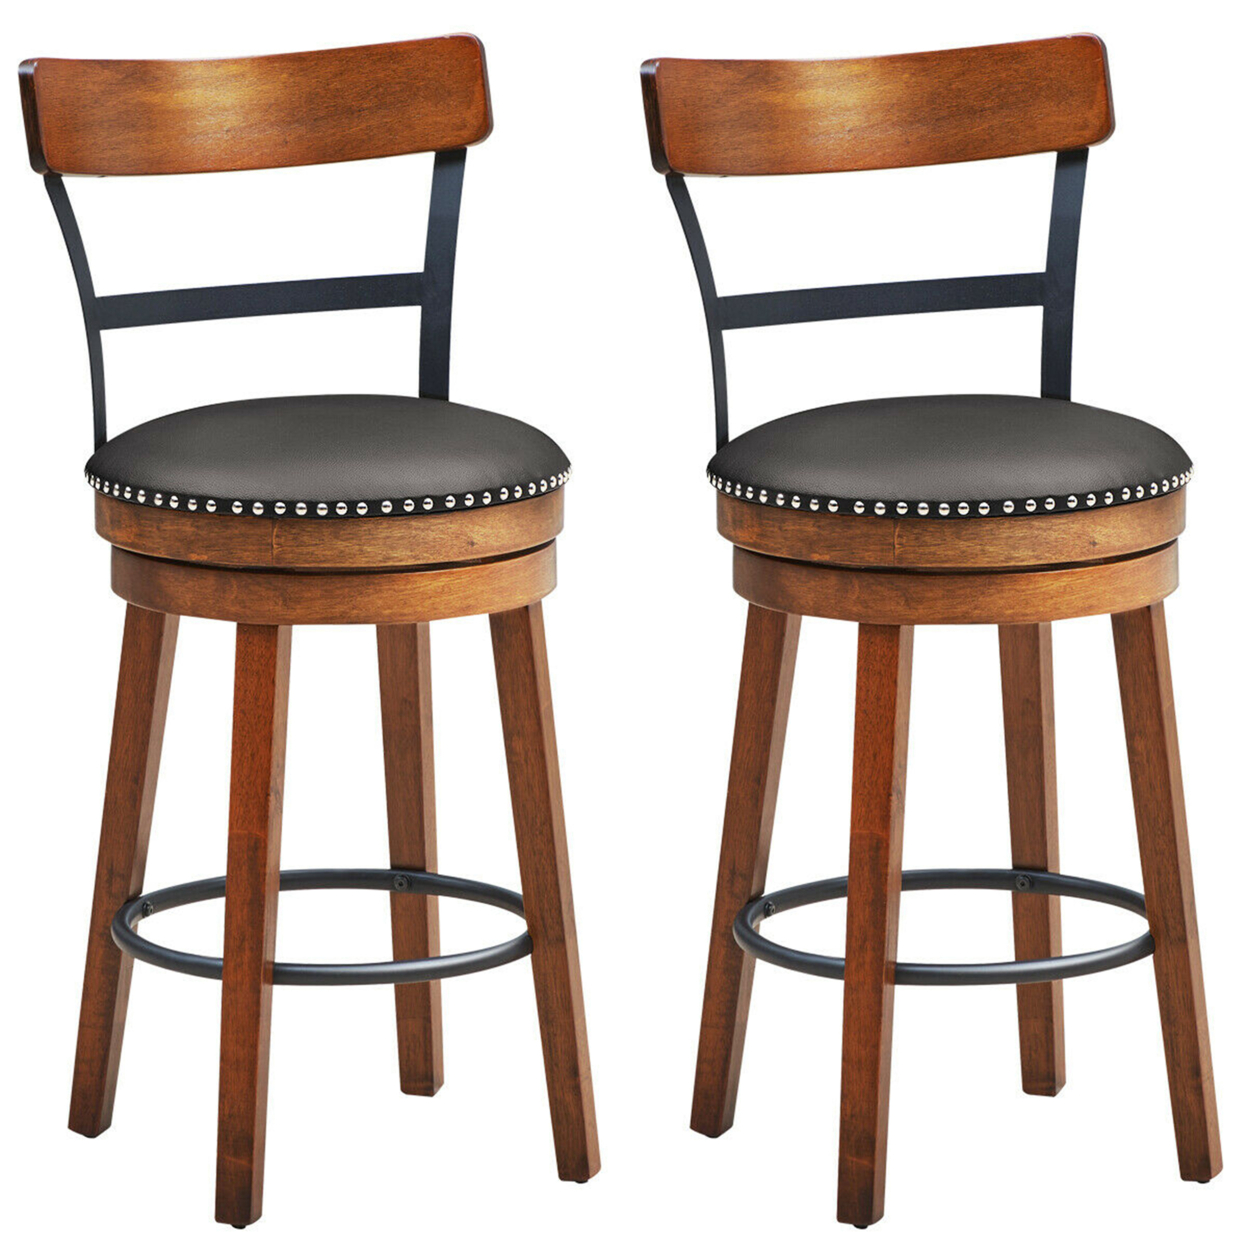 Set Of 2 BarStool 25.5'' Swivel Counter Height Dining Chair With Rubber Wood Legs